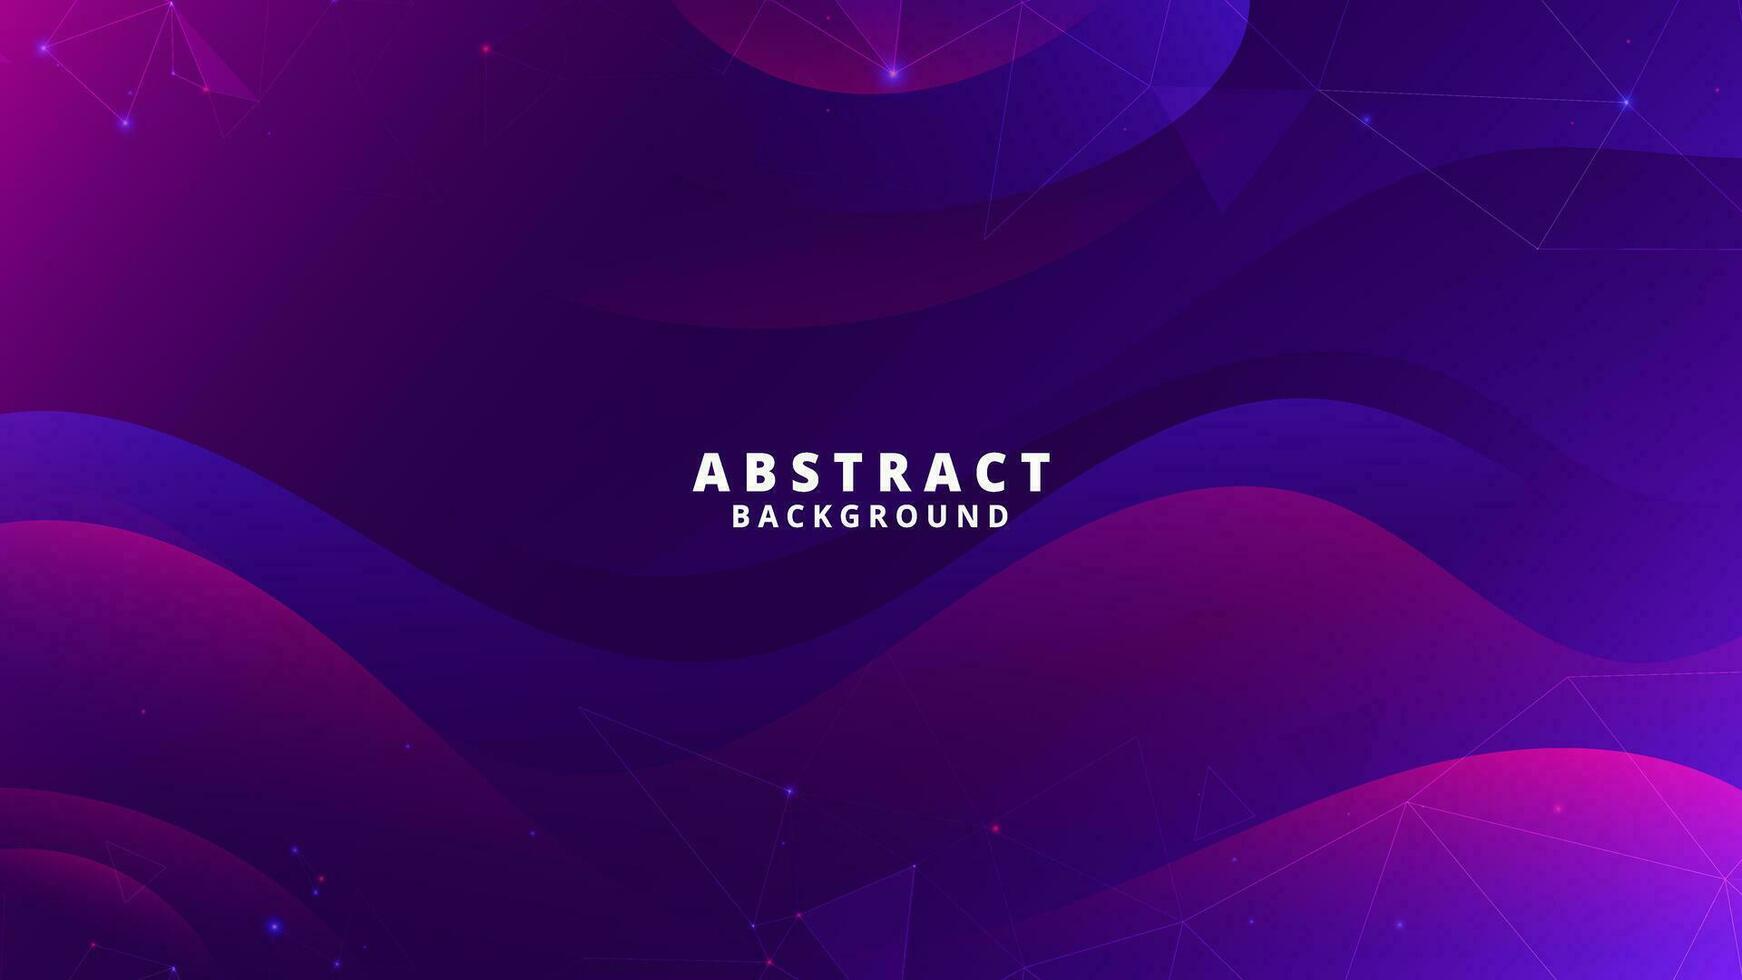 Abstract purple blue Background with Wavy Shapes. flowing and curvy shapes. This asset is suitable for website backgrounds, flyers, posters, and digital art projects. vector